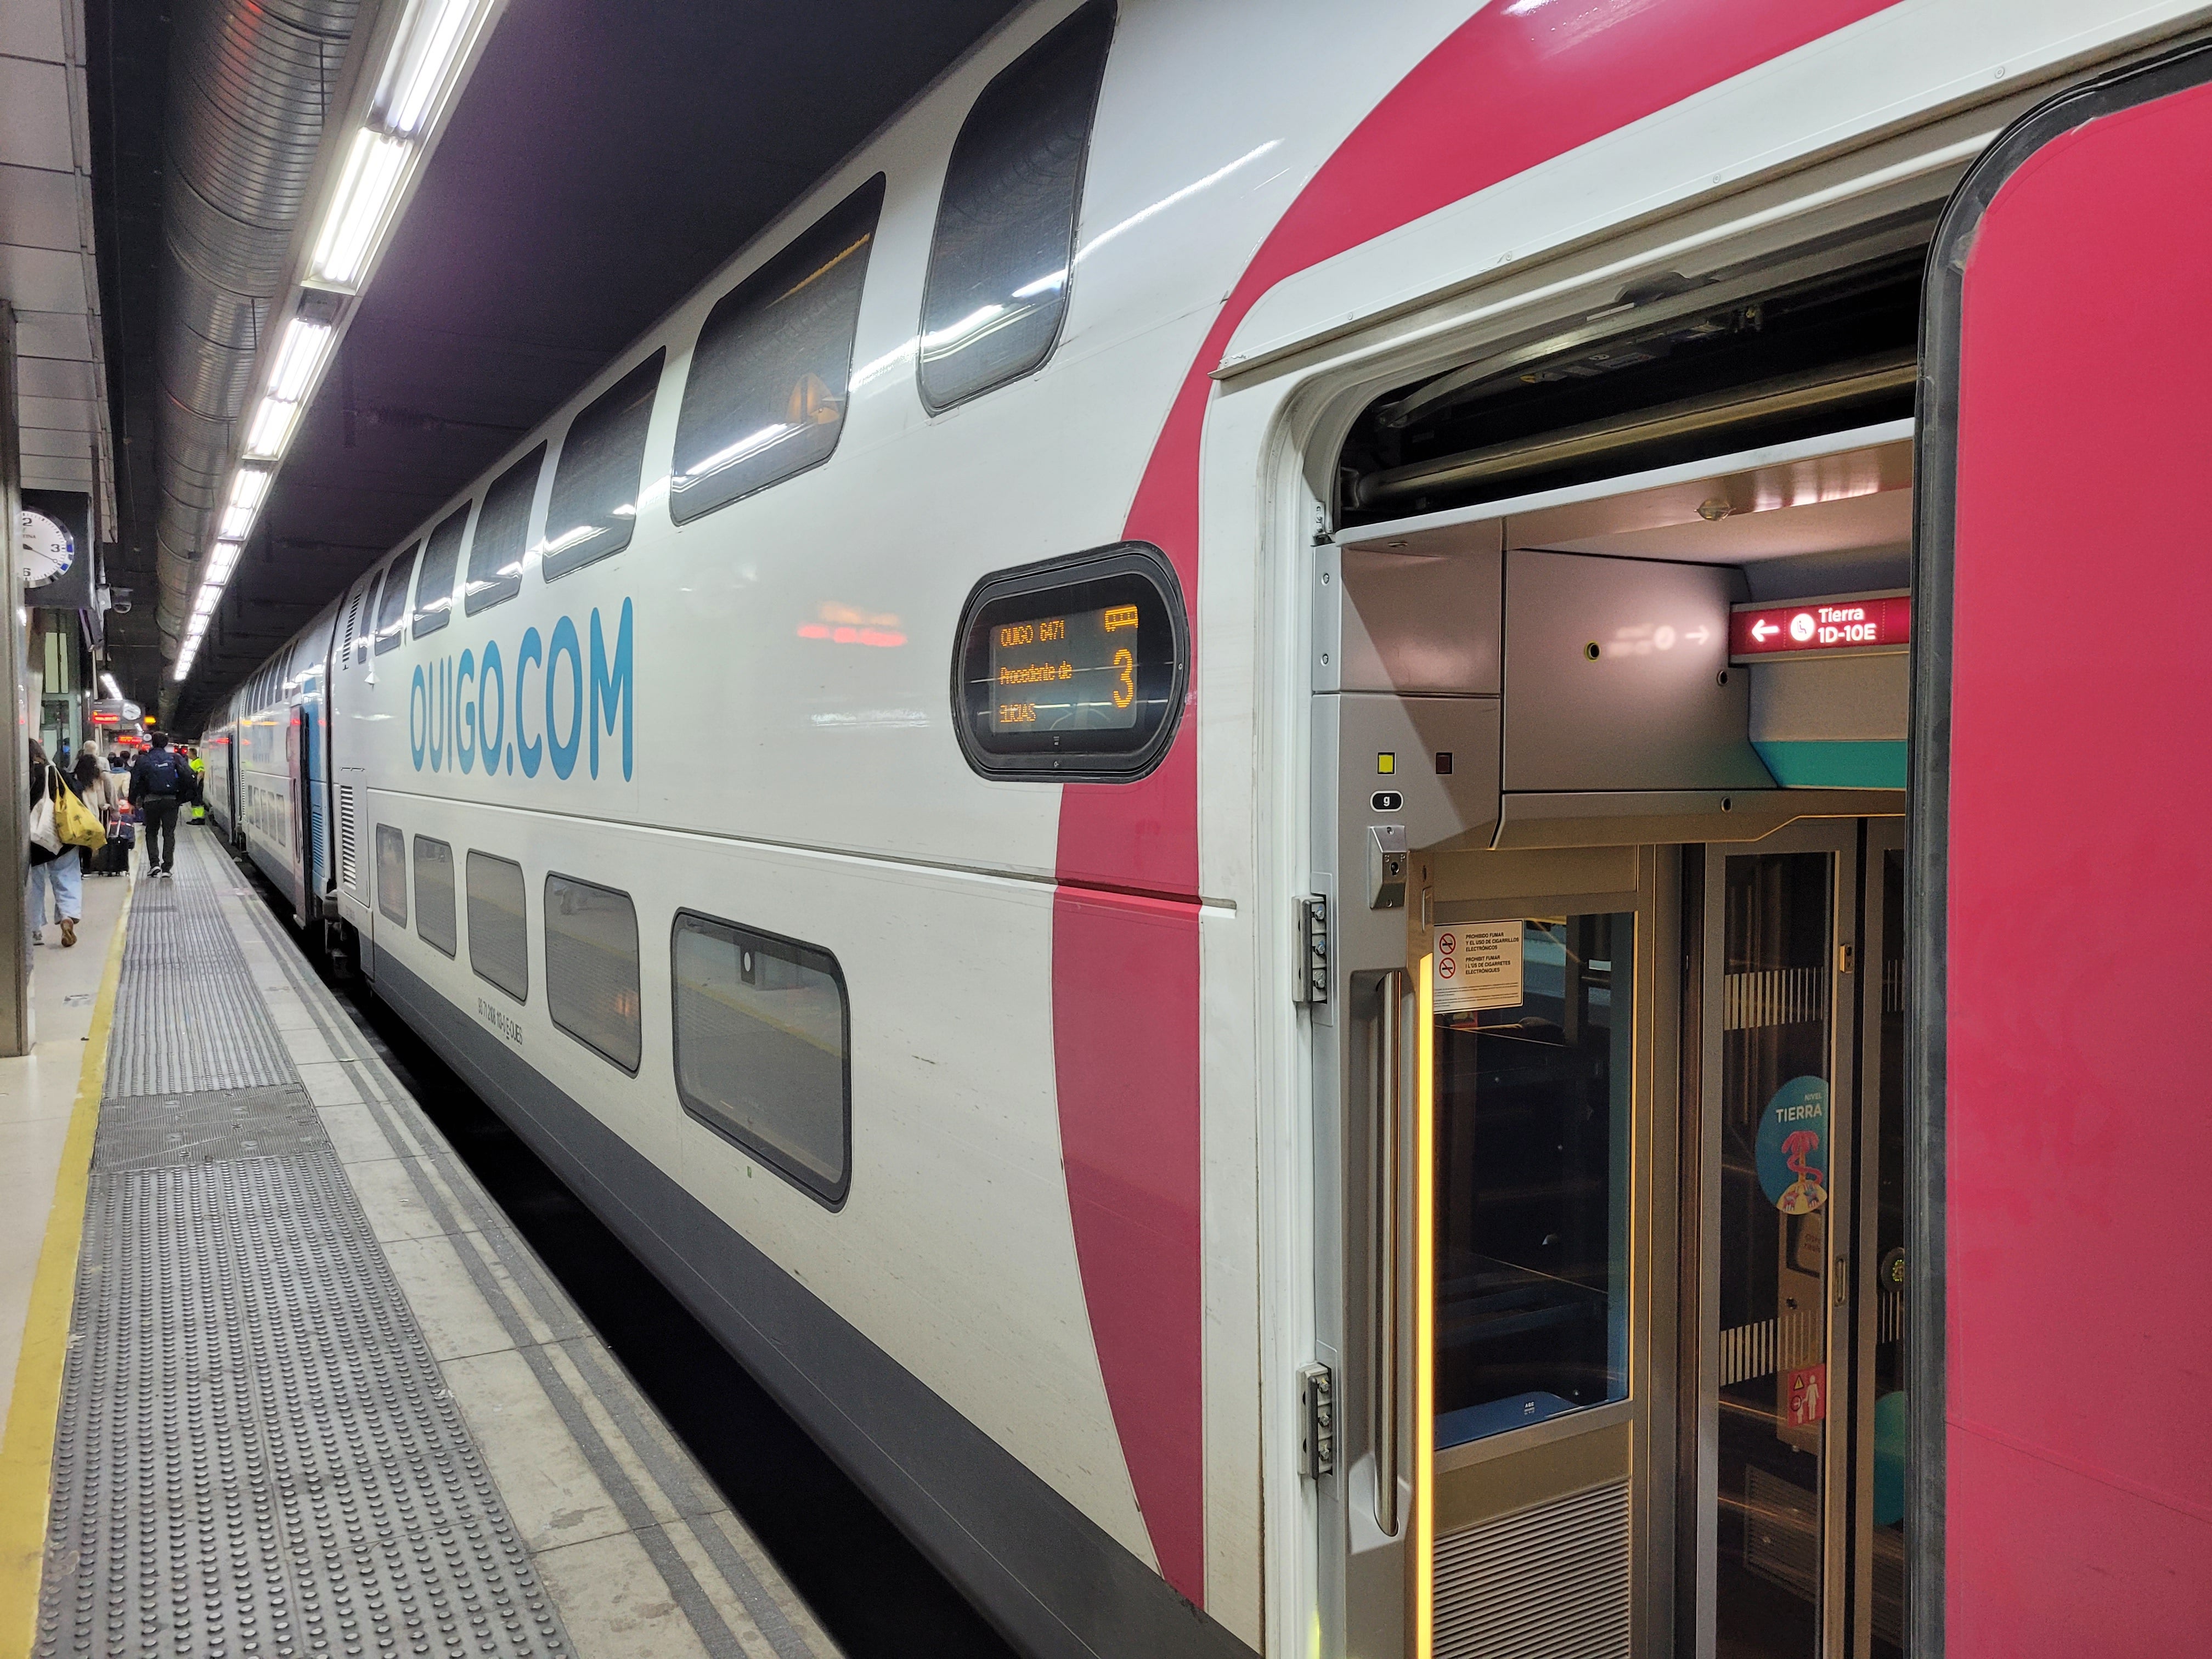 Low-cost operator Ouigo runs trains from Madrid to Barcelona